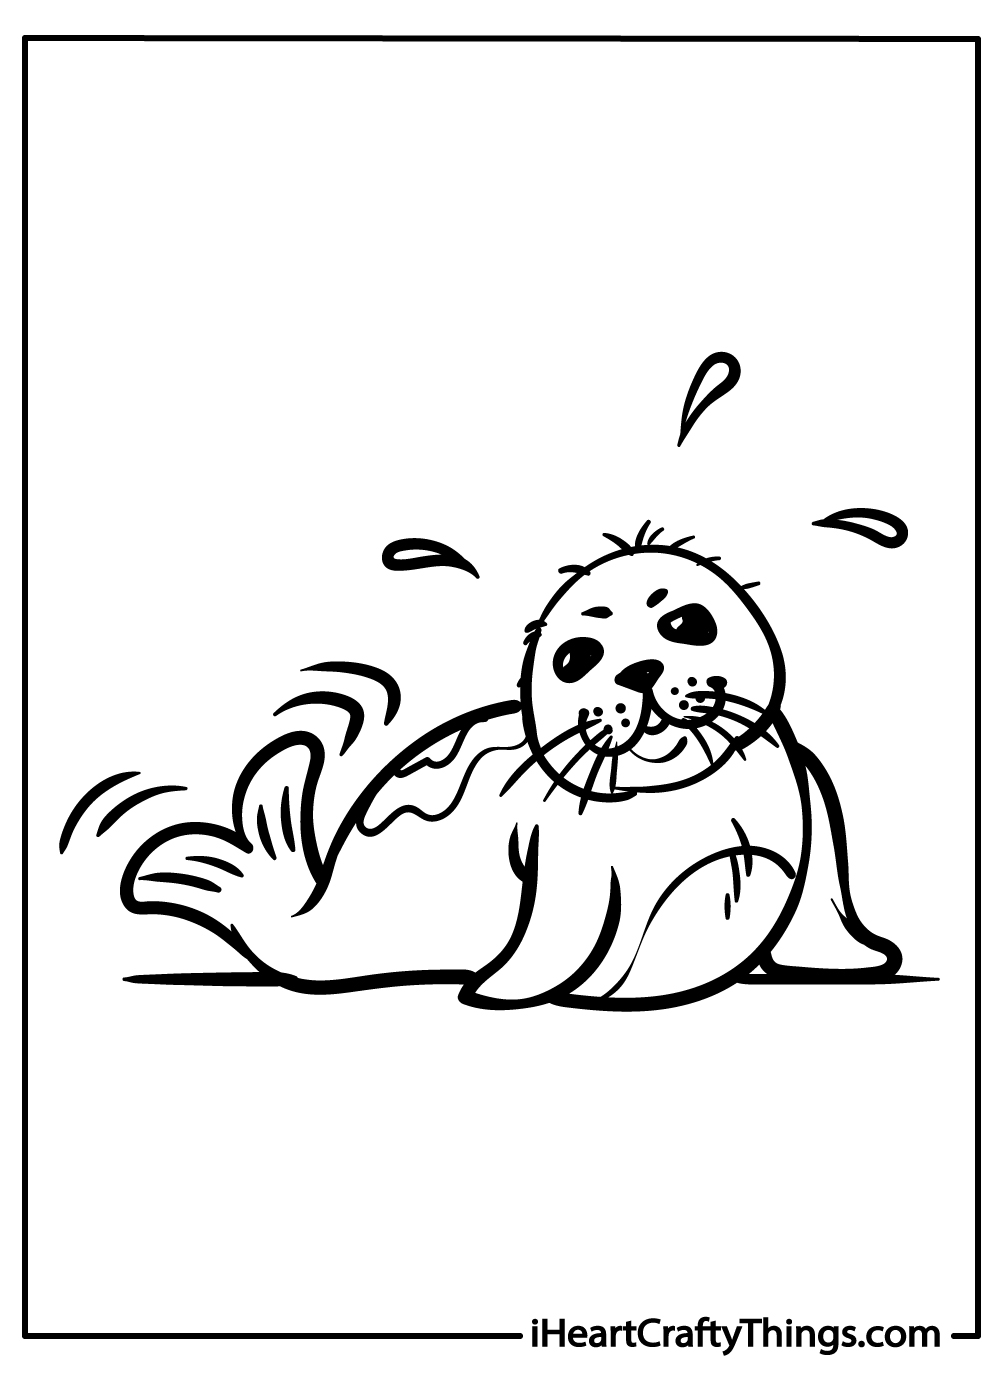 seal coloring pages for kids